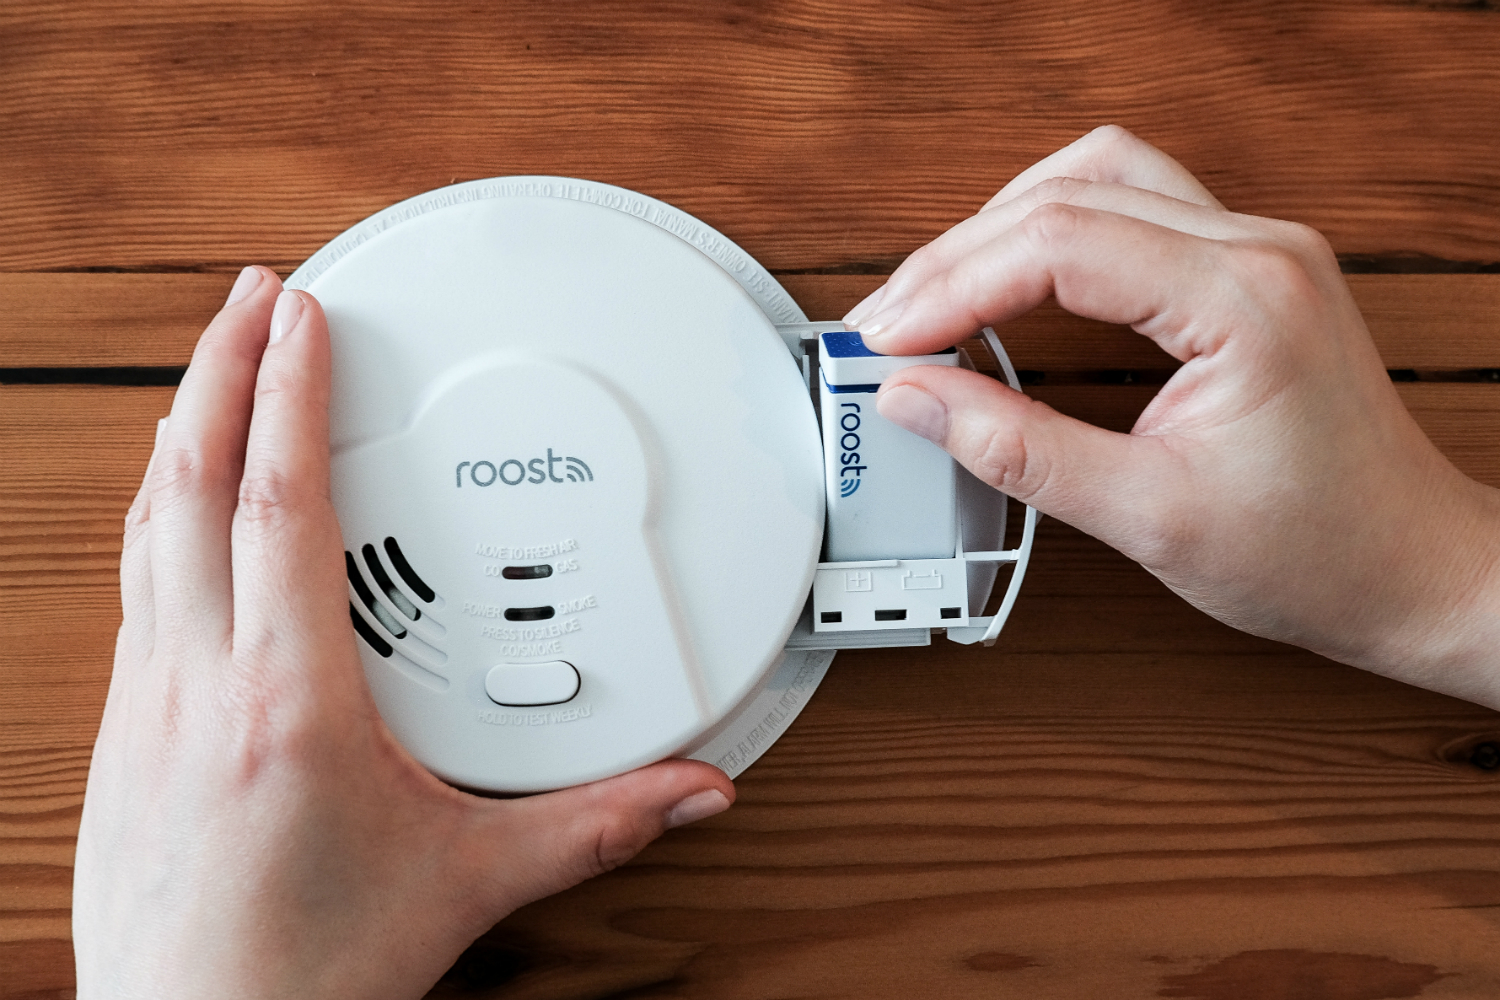 the roost smart smoke alarm detects fire co and natural gas rsa 400 inserting battery